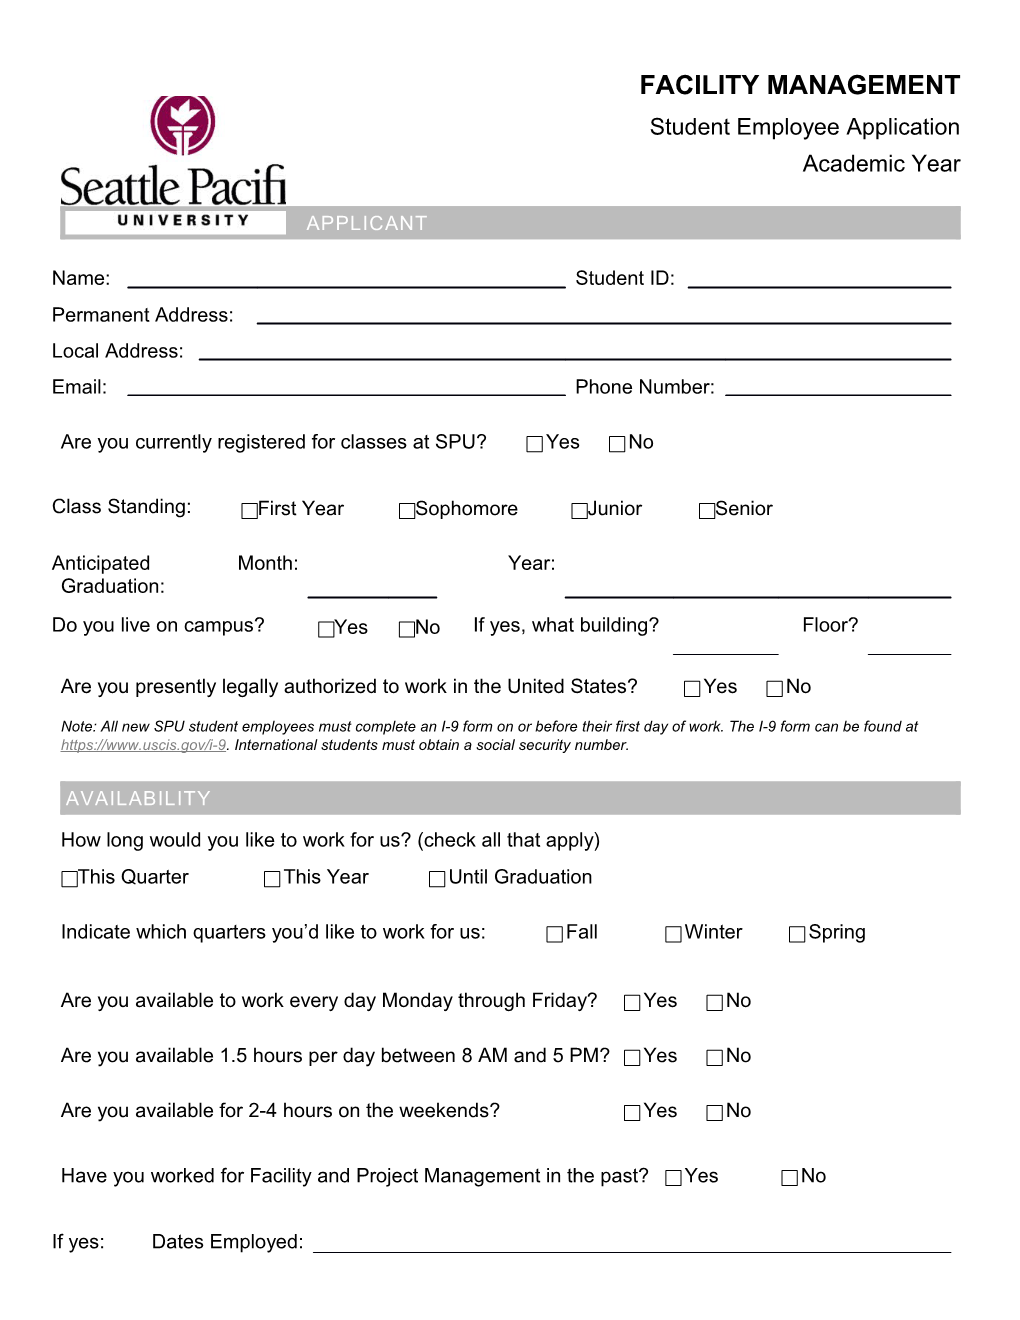 Are You Currently Registered for Classes at SPU?Yes No